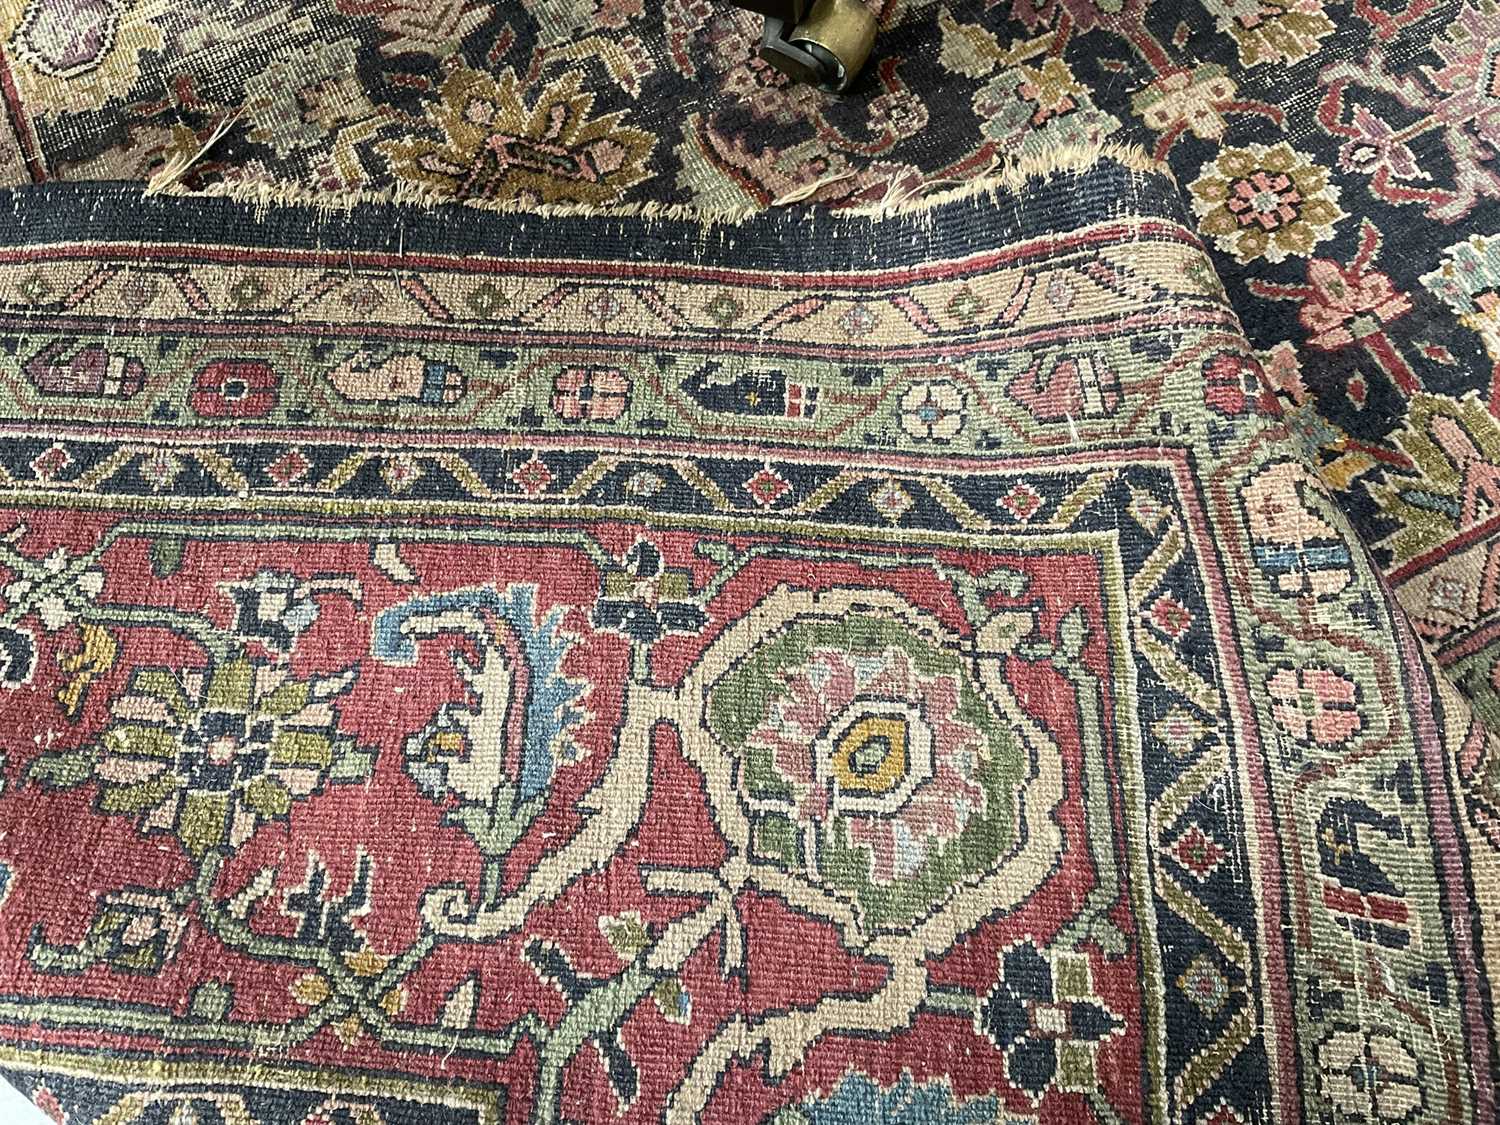 Good early Persian Bijar carpet, with allover floral knotwork on midnight blue ground, 400 x 300cm - Image 21 of 21